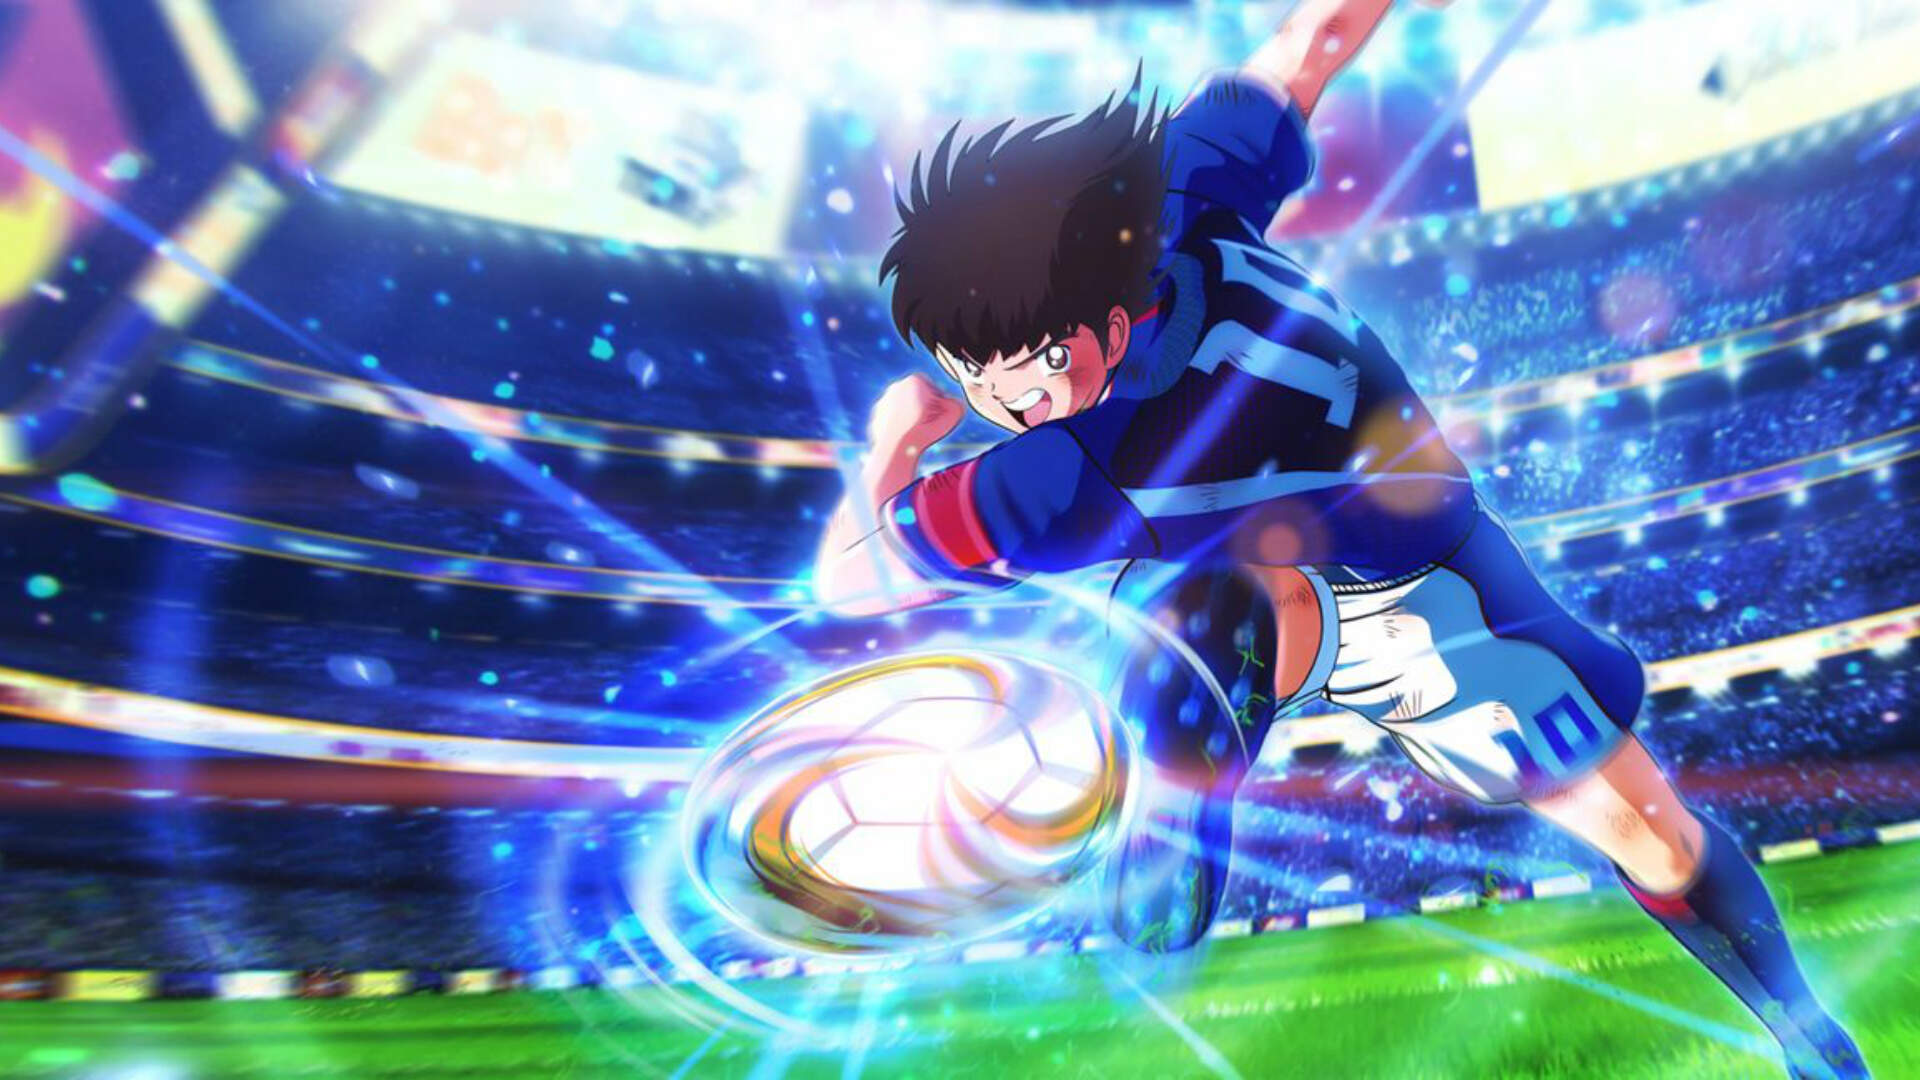 Soccer Anime HD Wallpapers - Wallpaper Cave